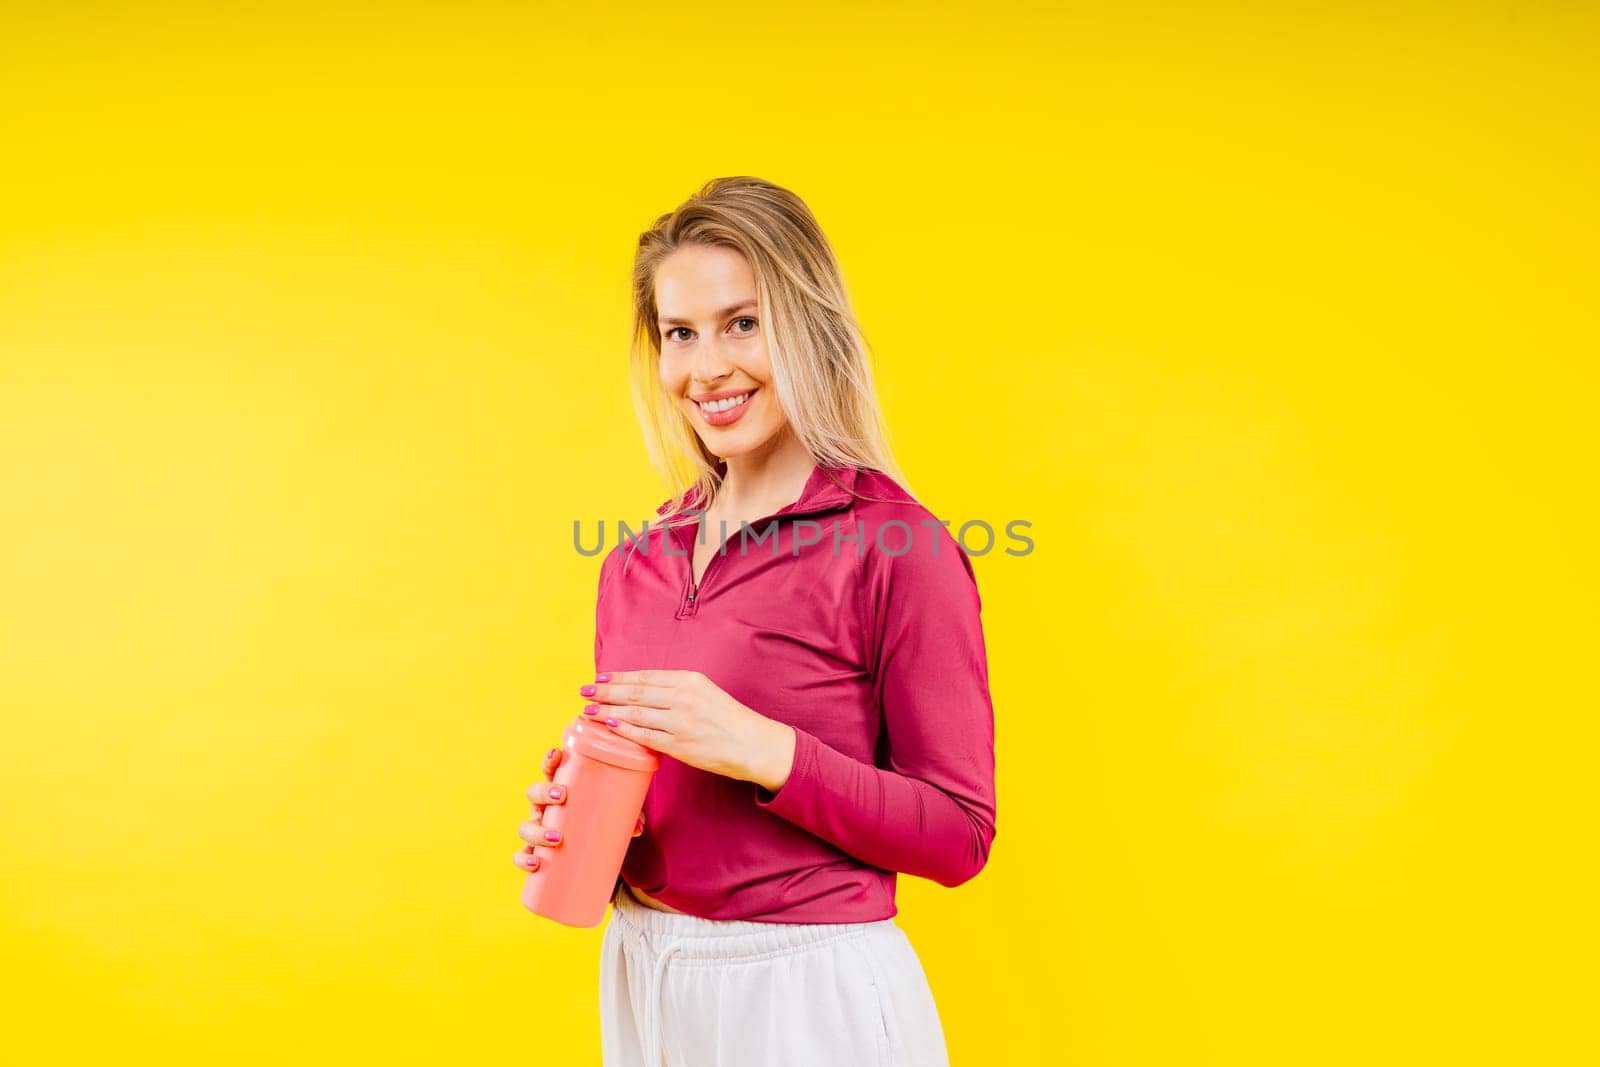 Studio fitness female portrait with bottle of water isolated on yellow background by Zelenin